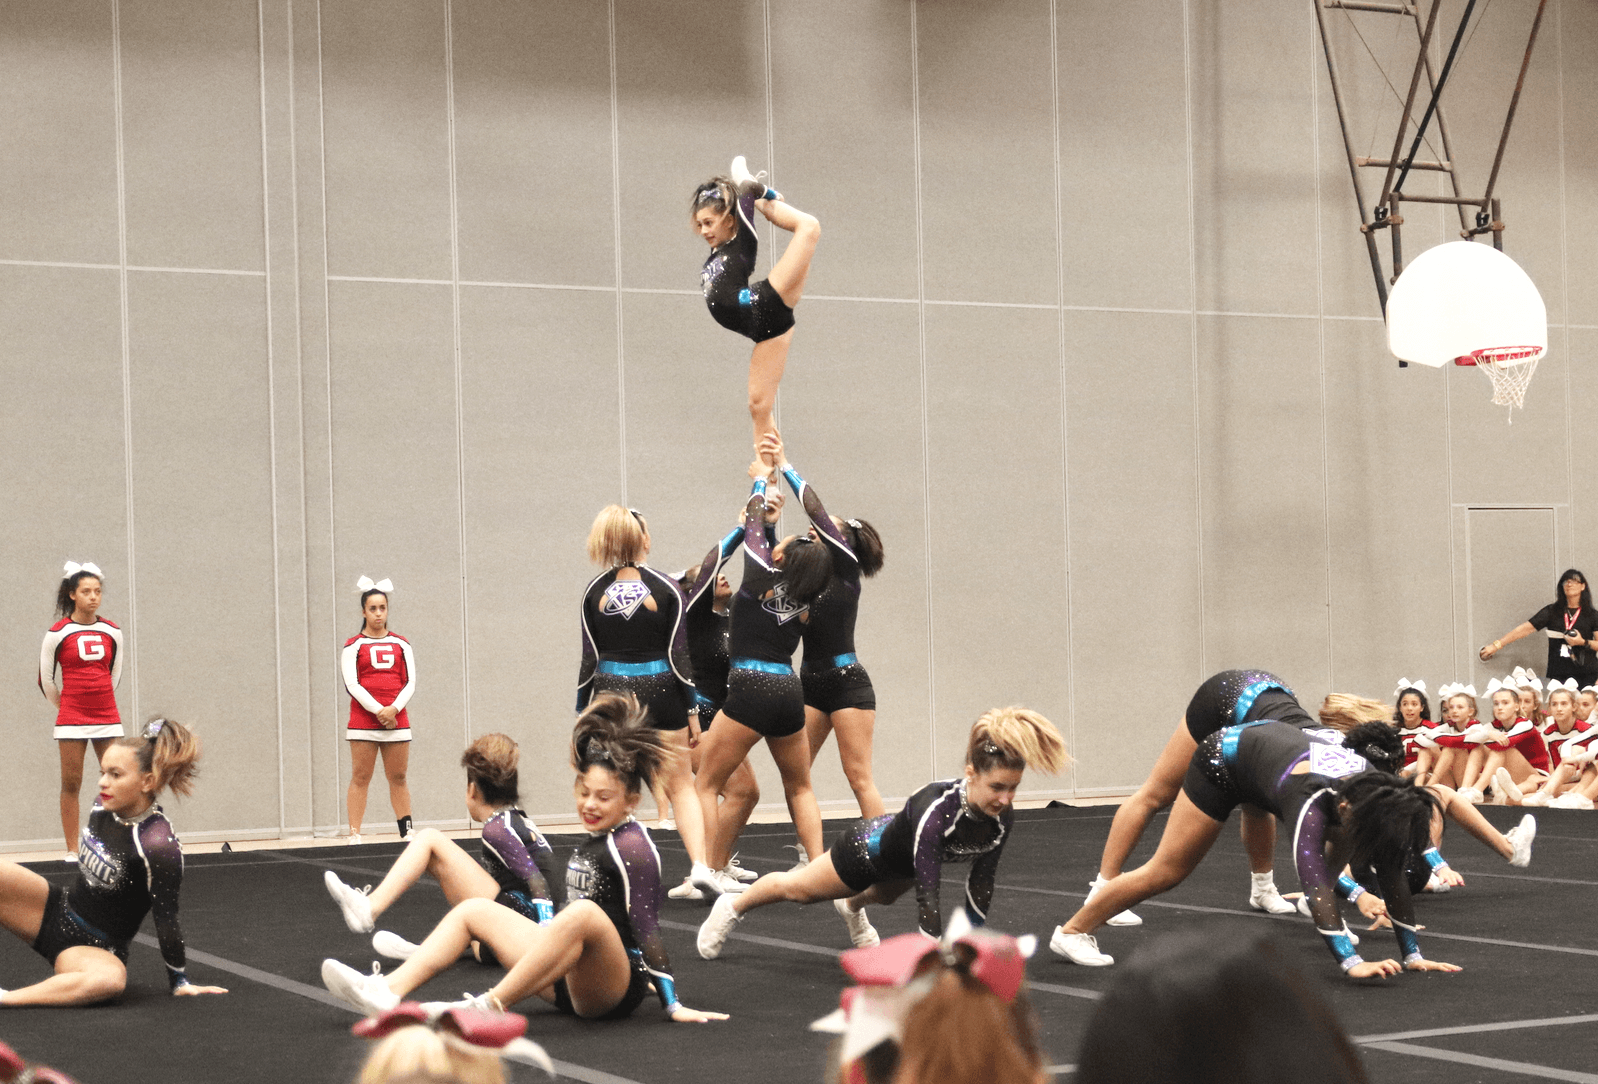 Spirit All Stars were special guests at the 20th annual GYCL Cheer Exhibition at Greenwich High School. Nov 3, 2019 Photo: Leslie Yager